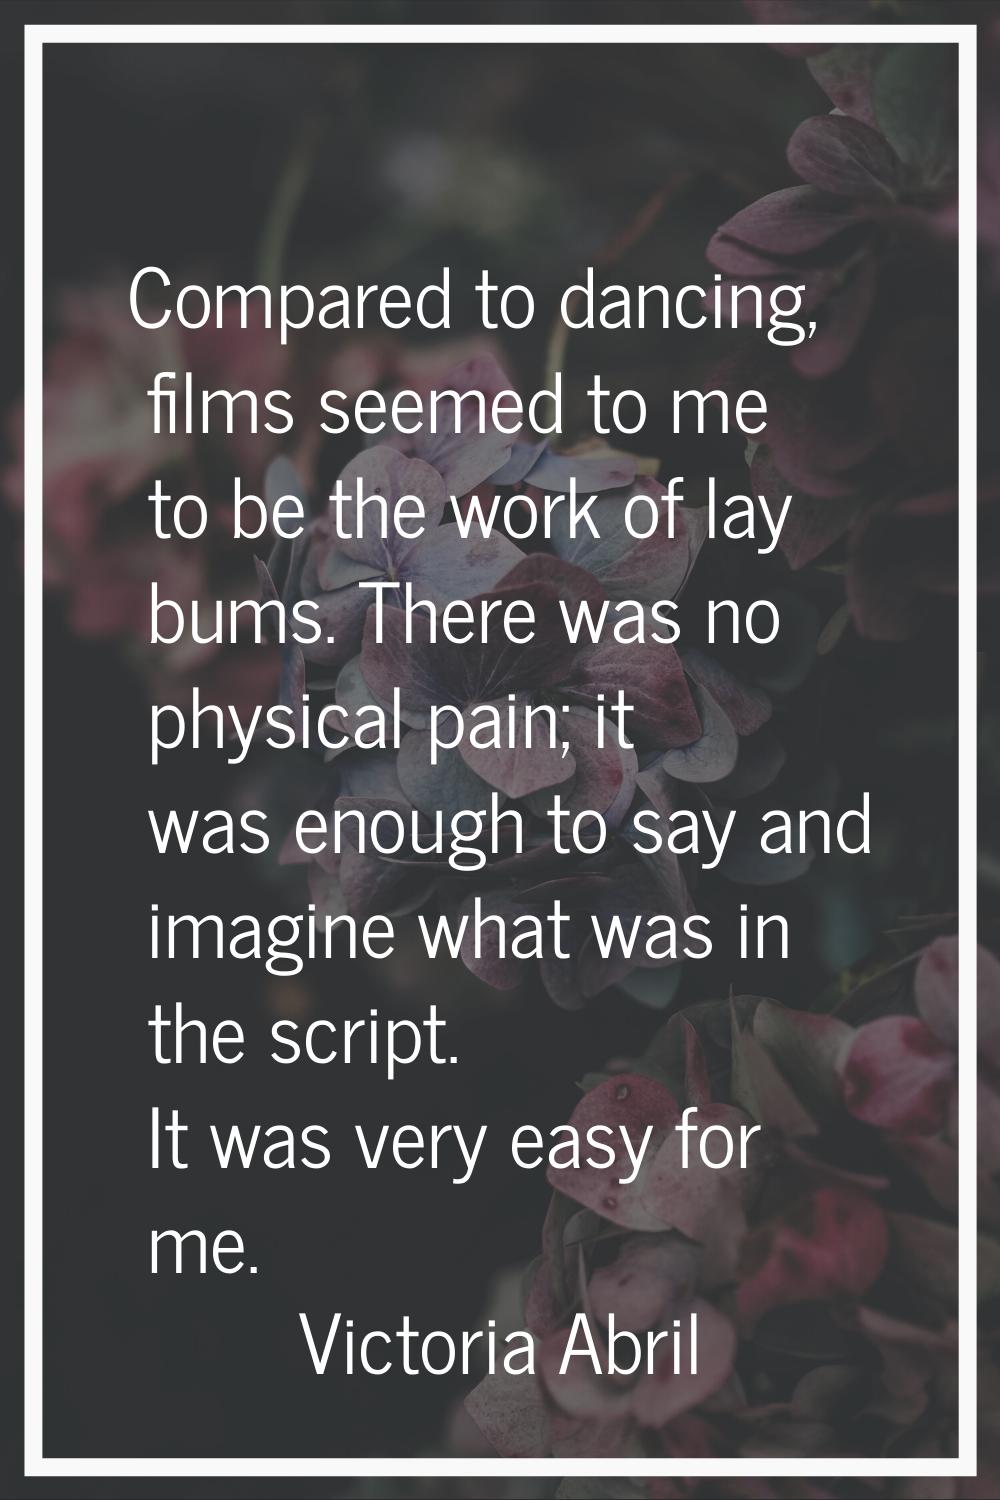 Compared to dancing, films seemed to me to be the work of lay bums. There was no physical pain; it 